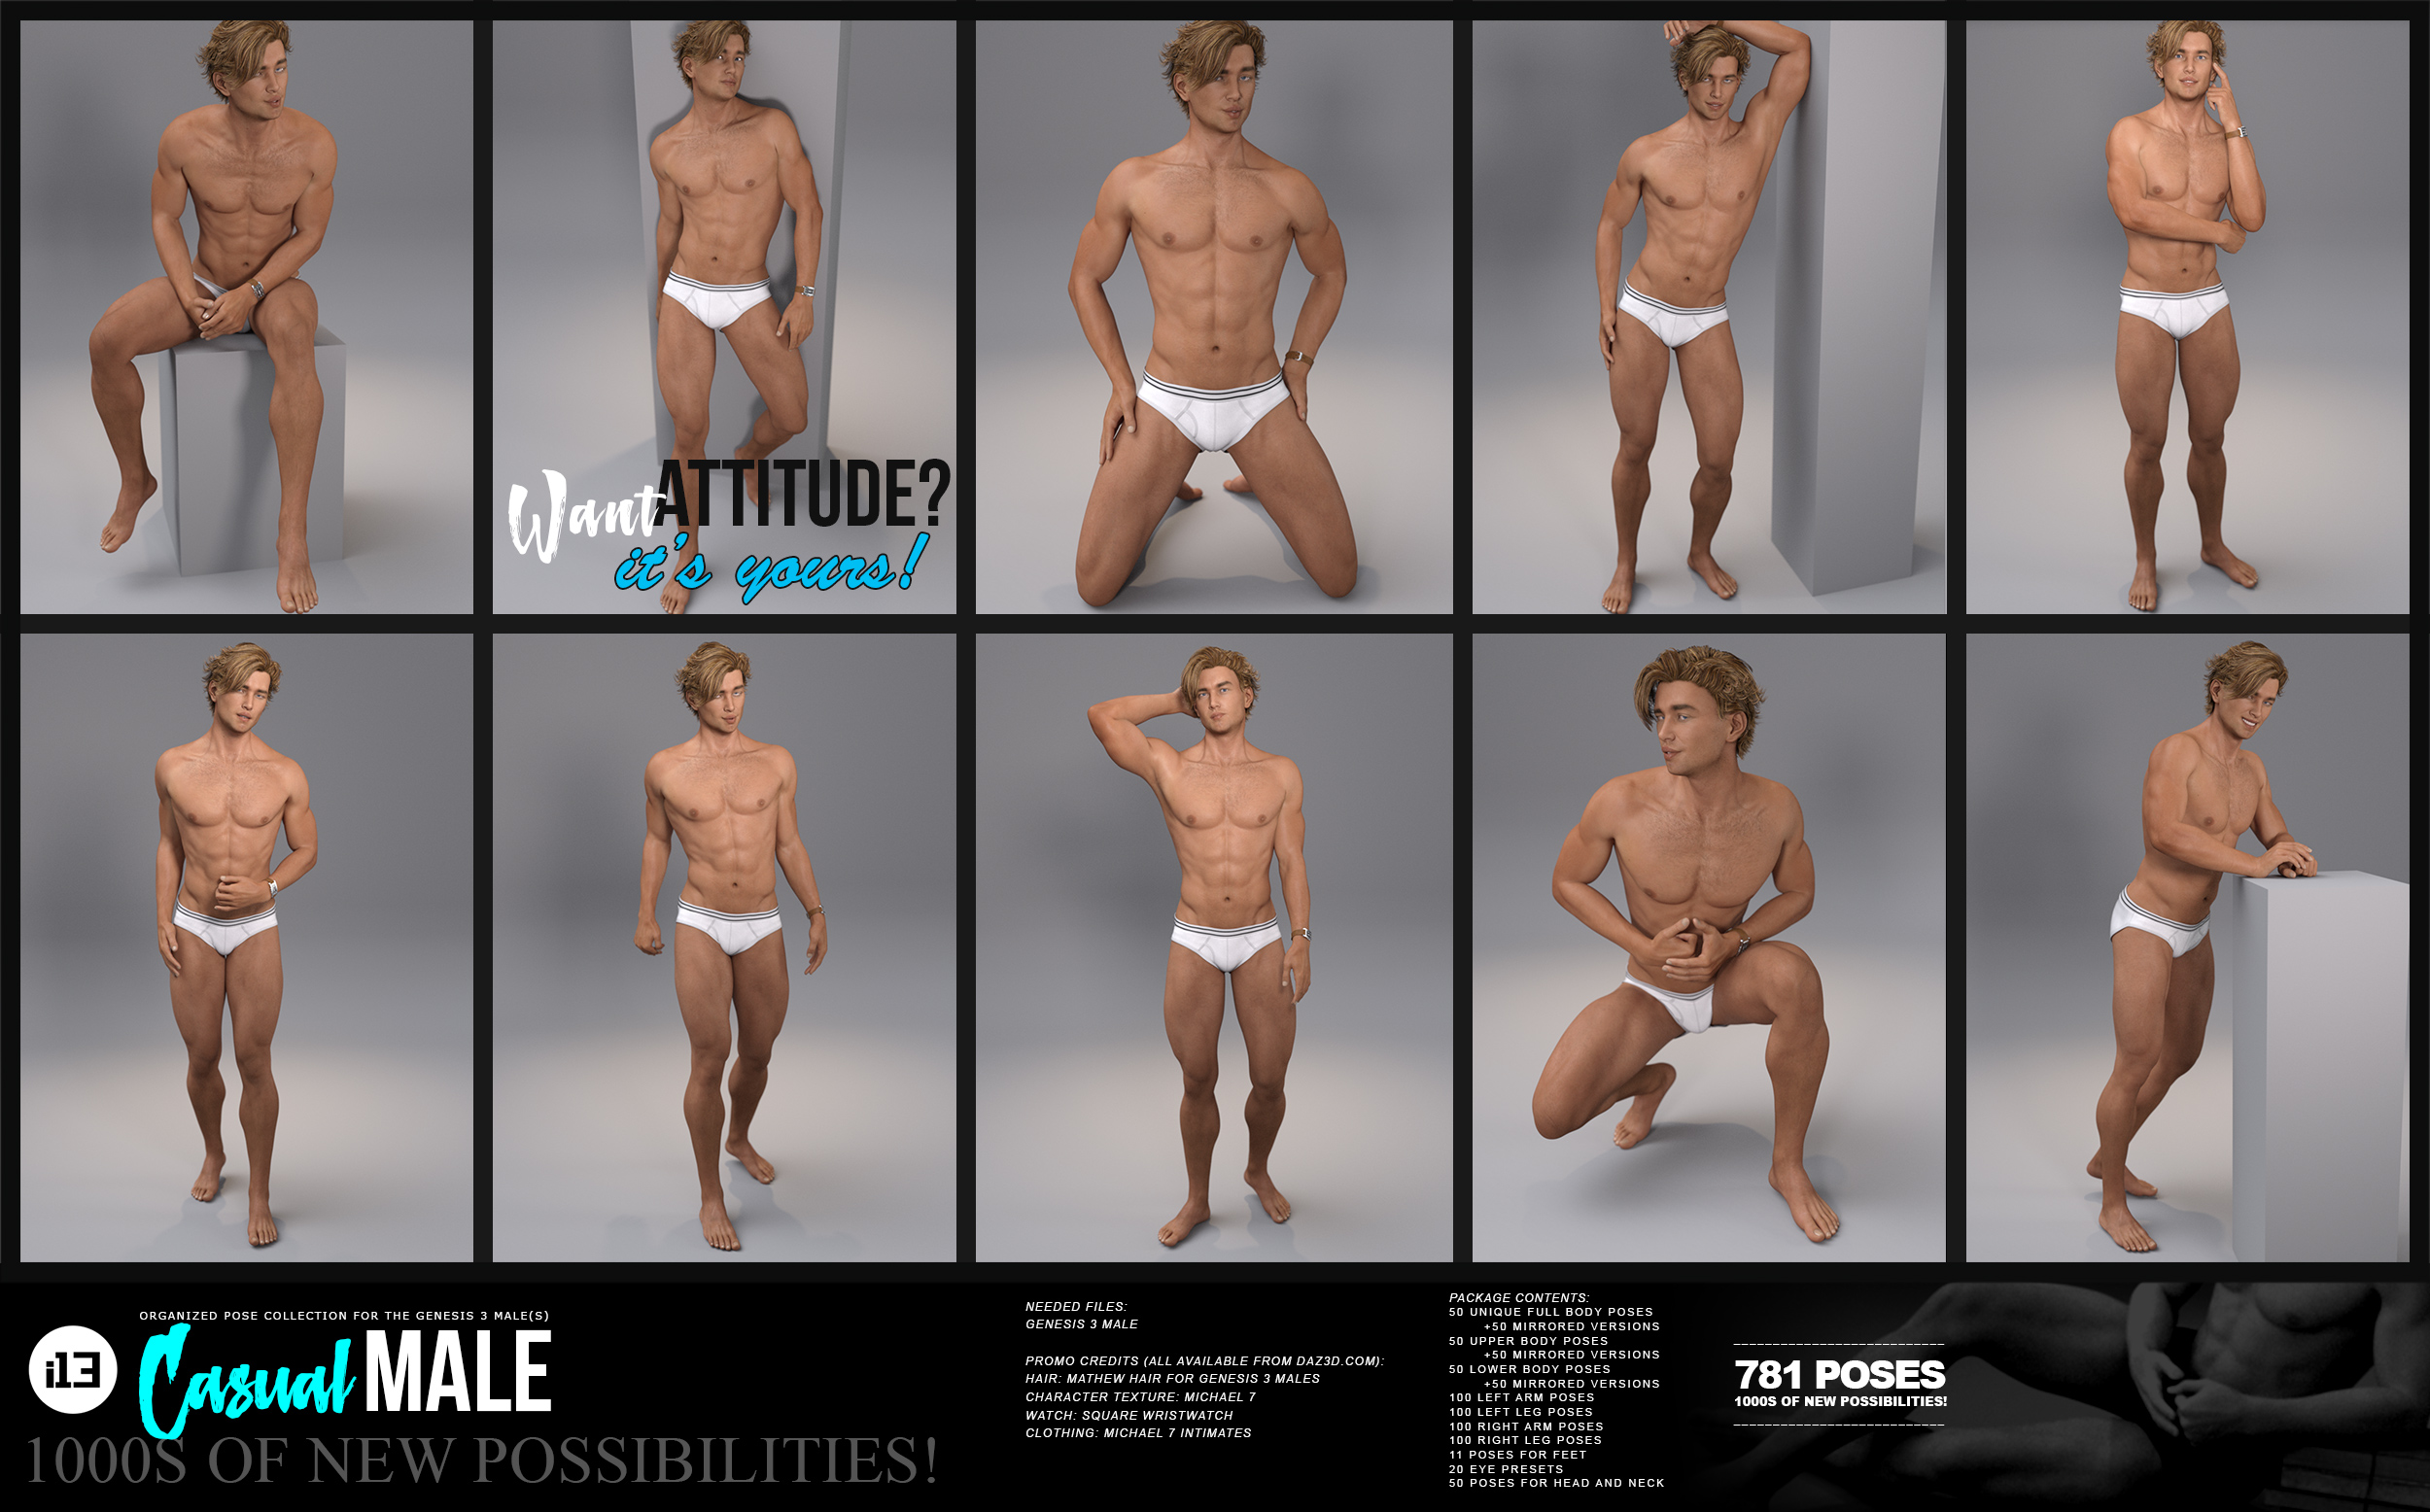 i13 Casual Male Pose Collection for the Genesis 3 Male(s) by: ironman13, 3D Models by Daz 3D